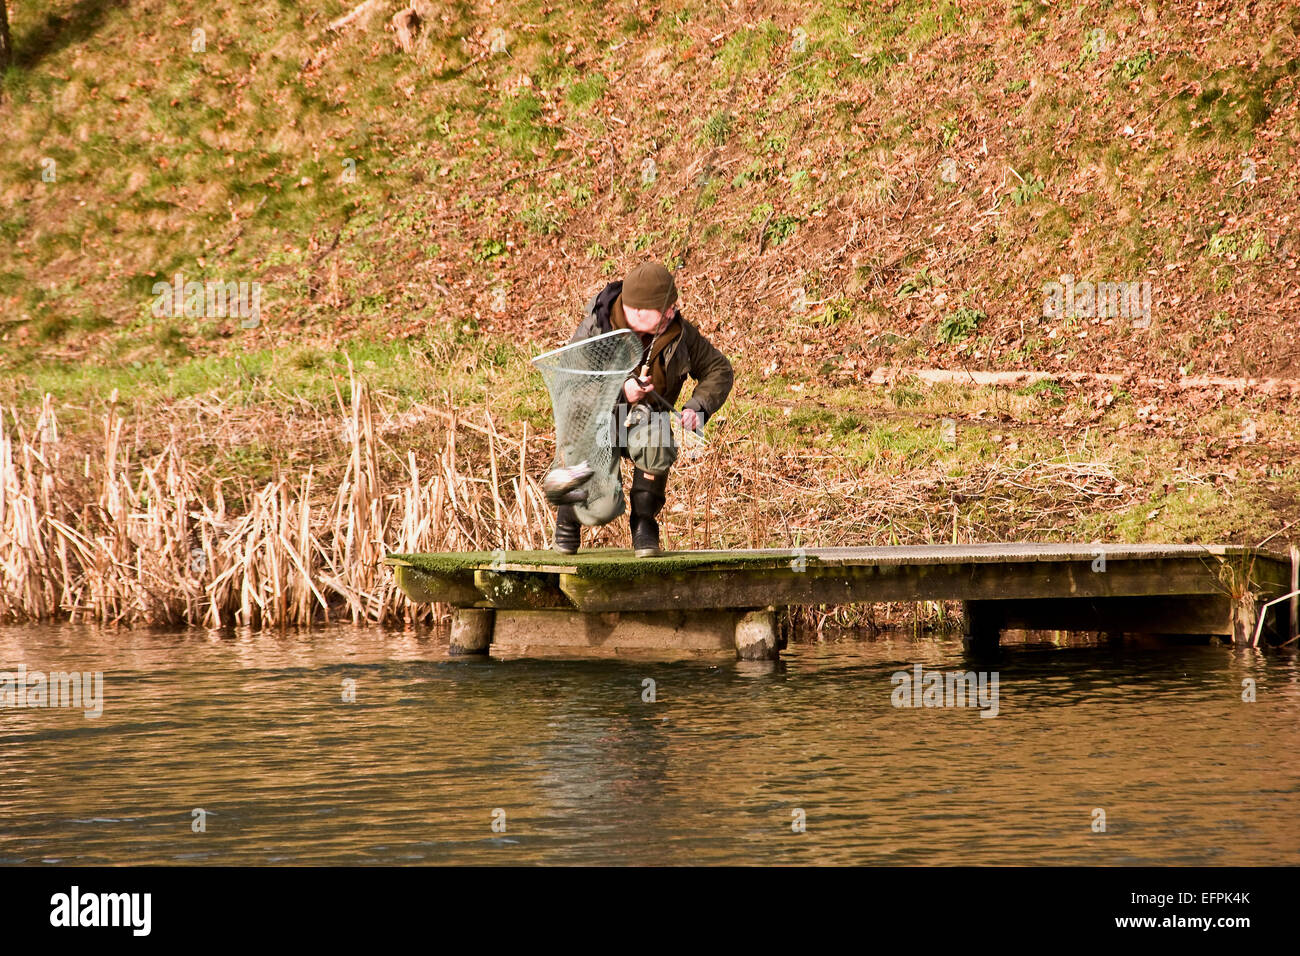 Fly Fishing for Trout at Forbes of Kingennie in Broughty Ferry near Dundee,Scotland, UK Stock Photo